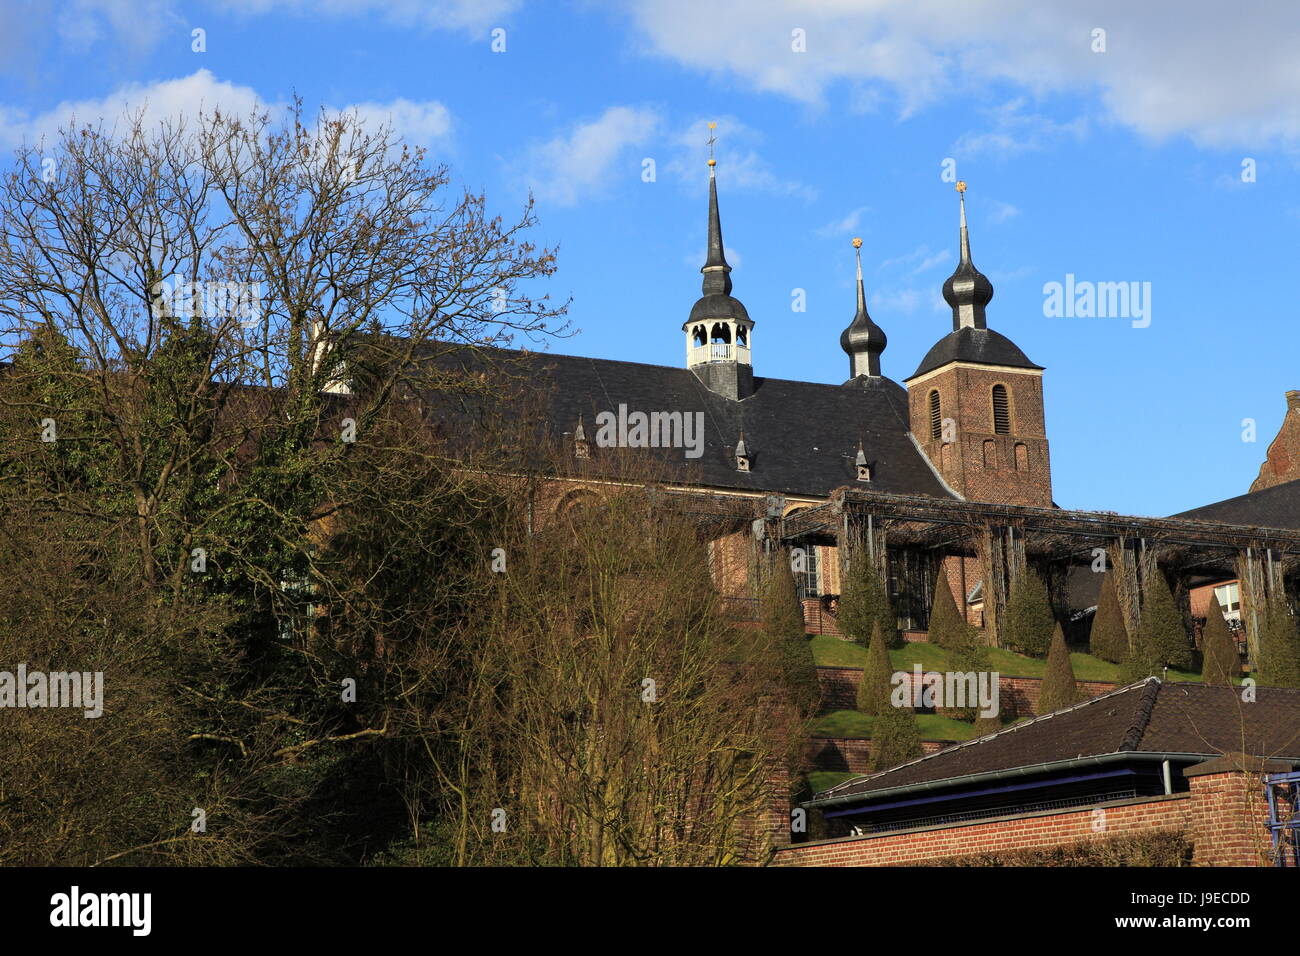 sights, monastery, style of construction, architecture, architectural style, Stock Photo